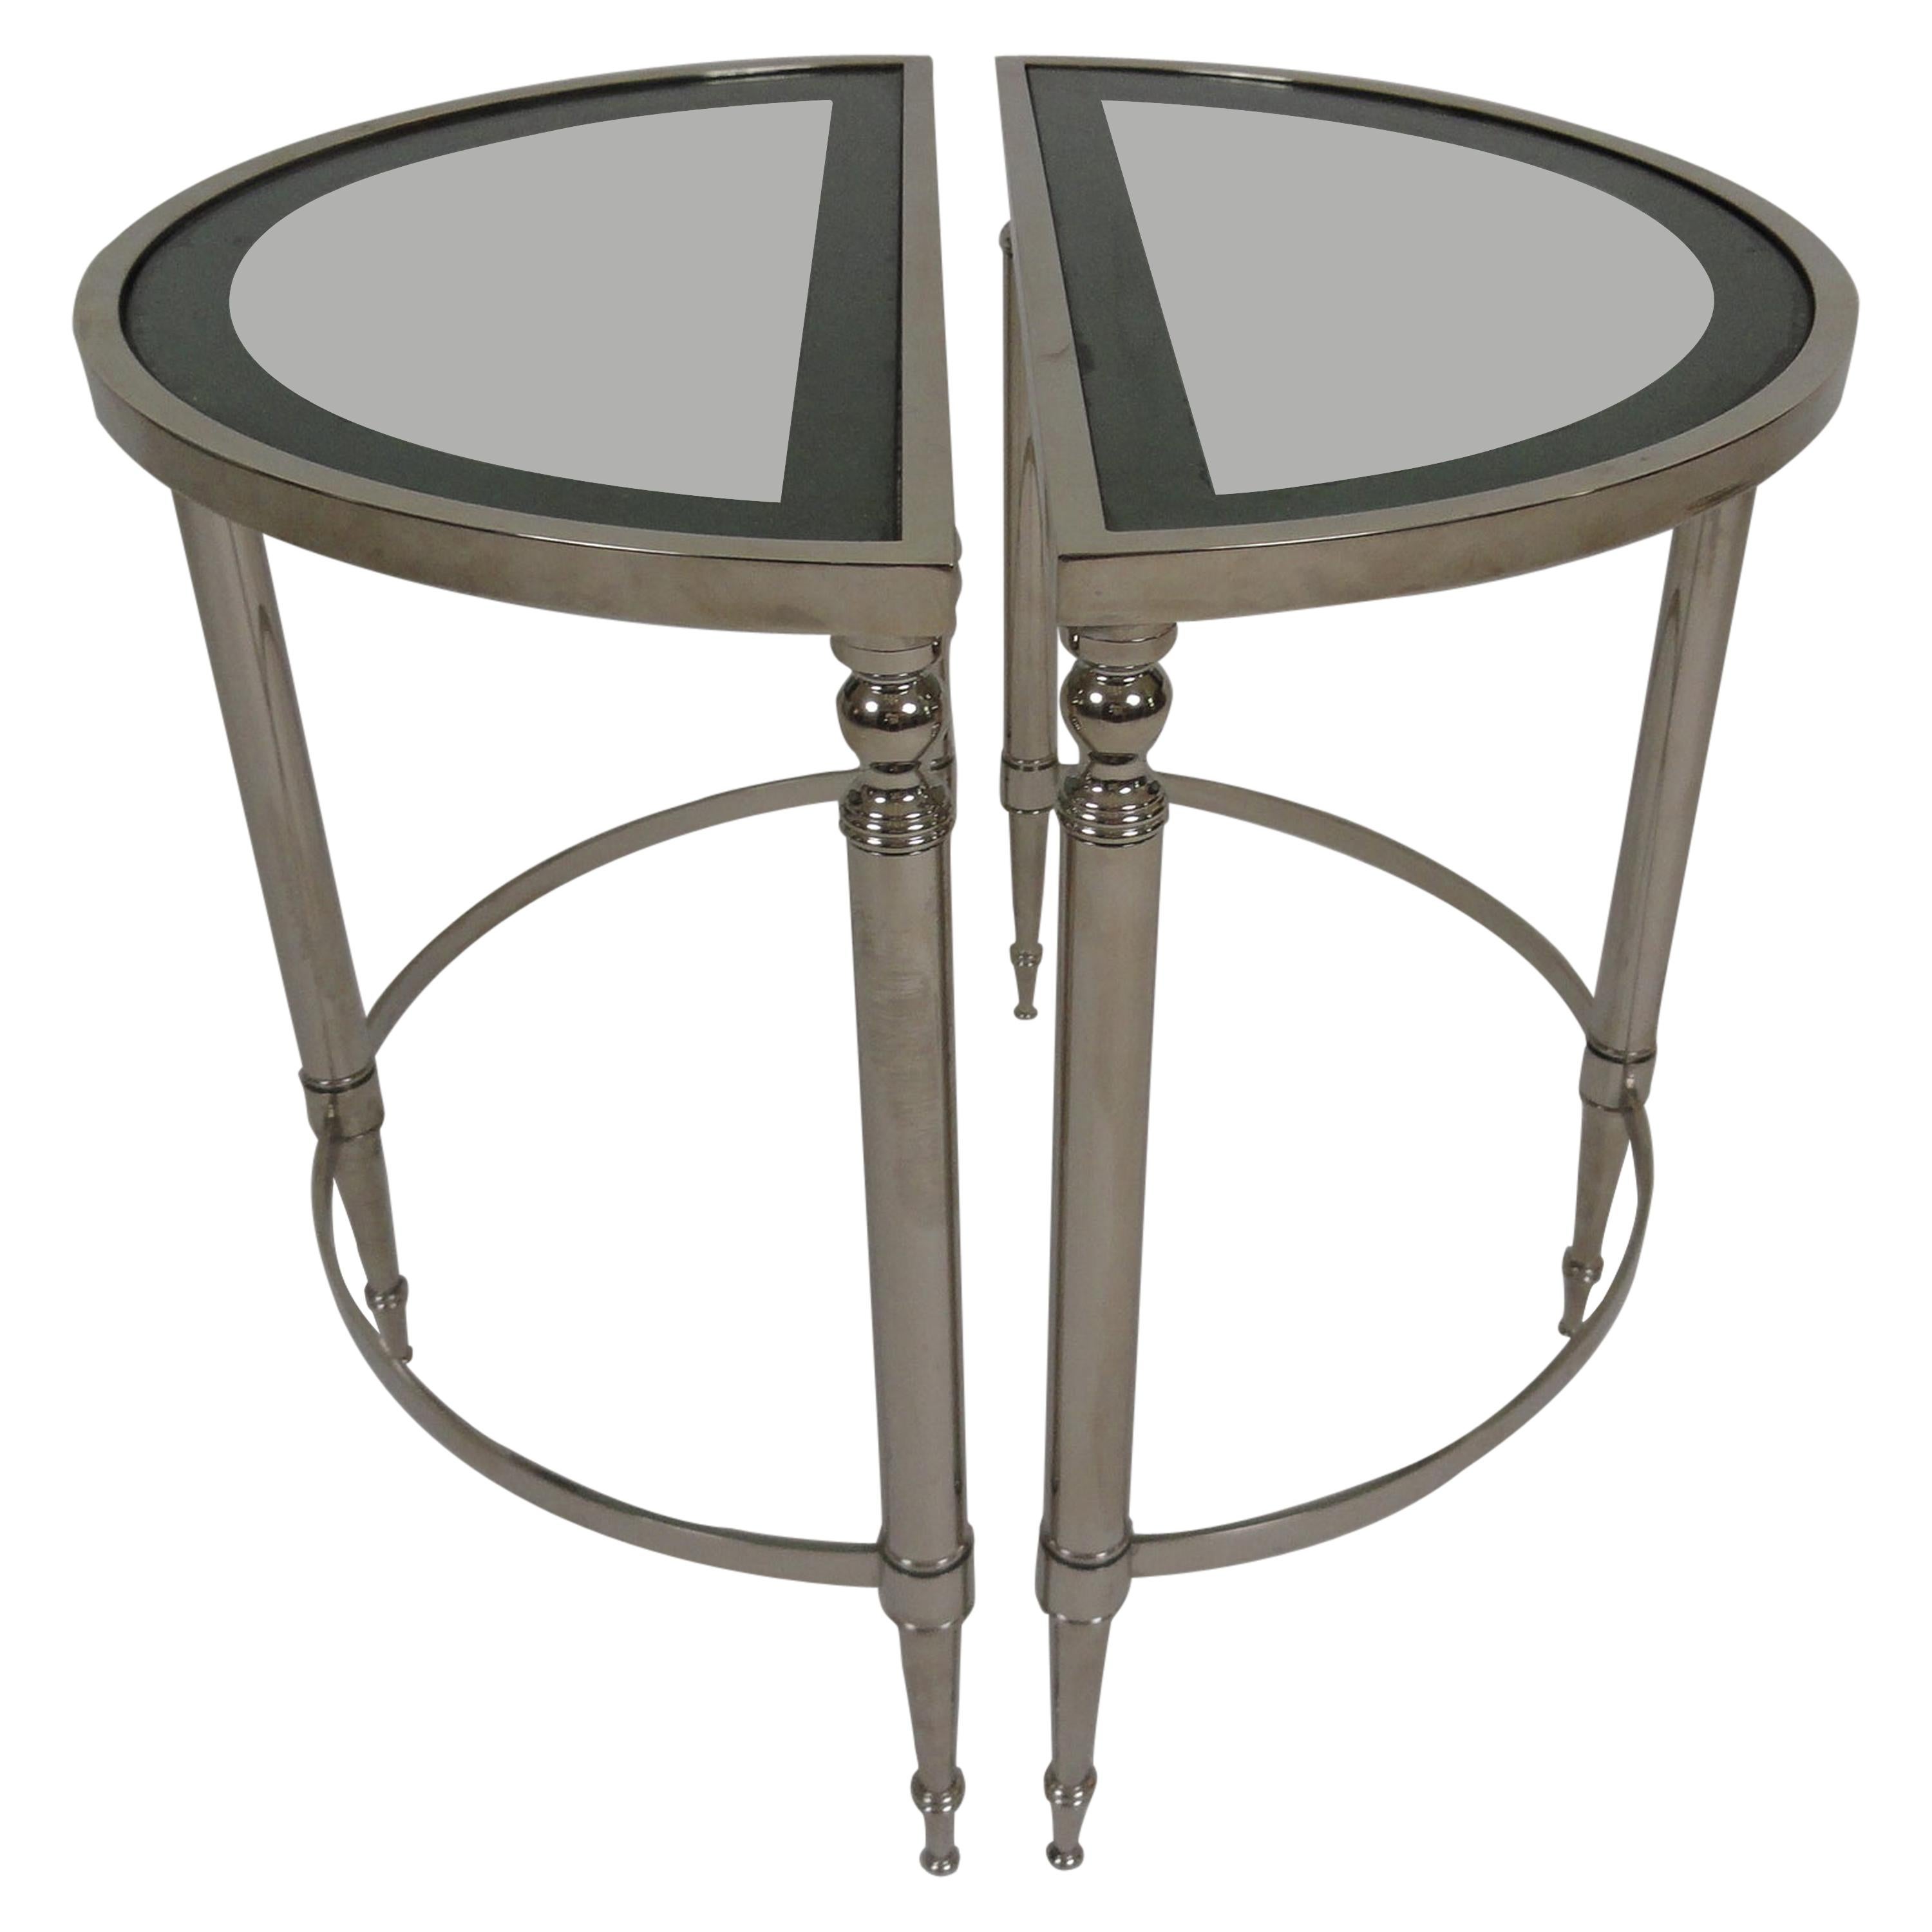 Matching Pair of Nickel-Plated Demilune Tables For Sale